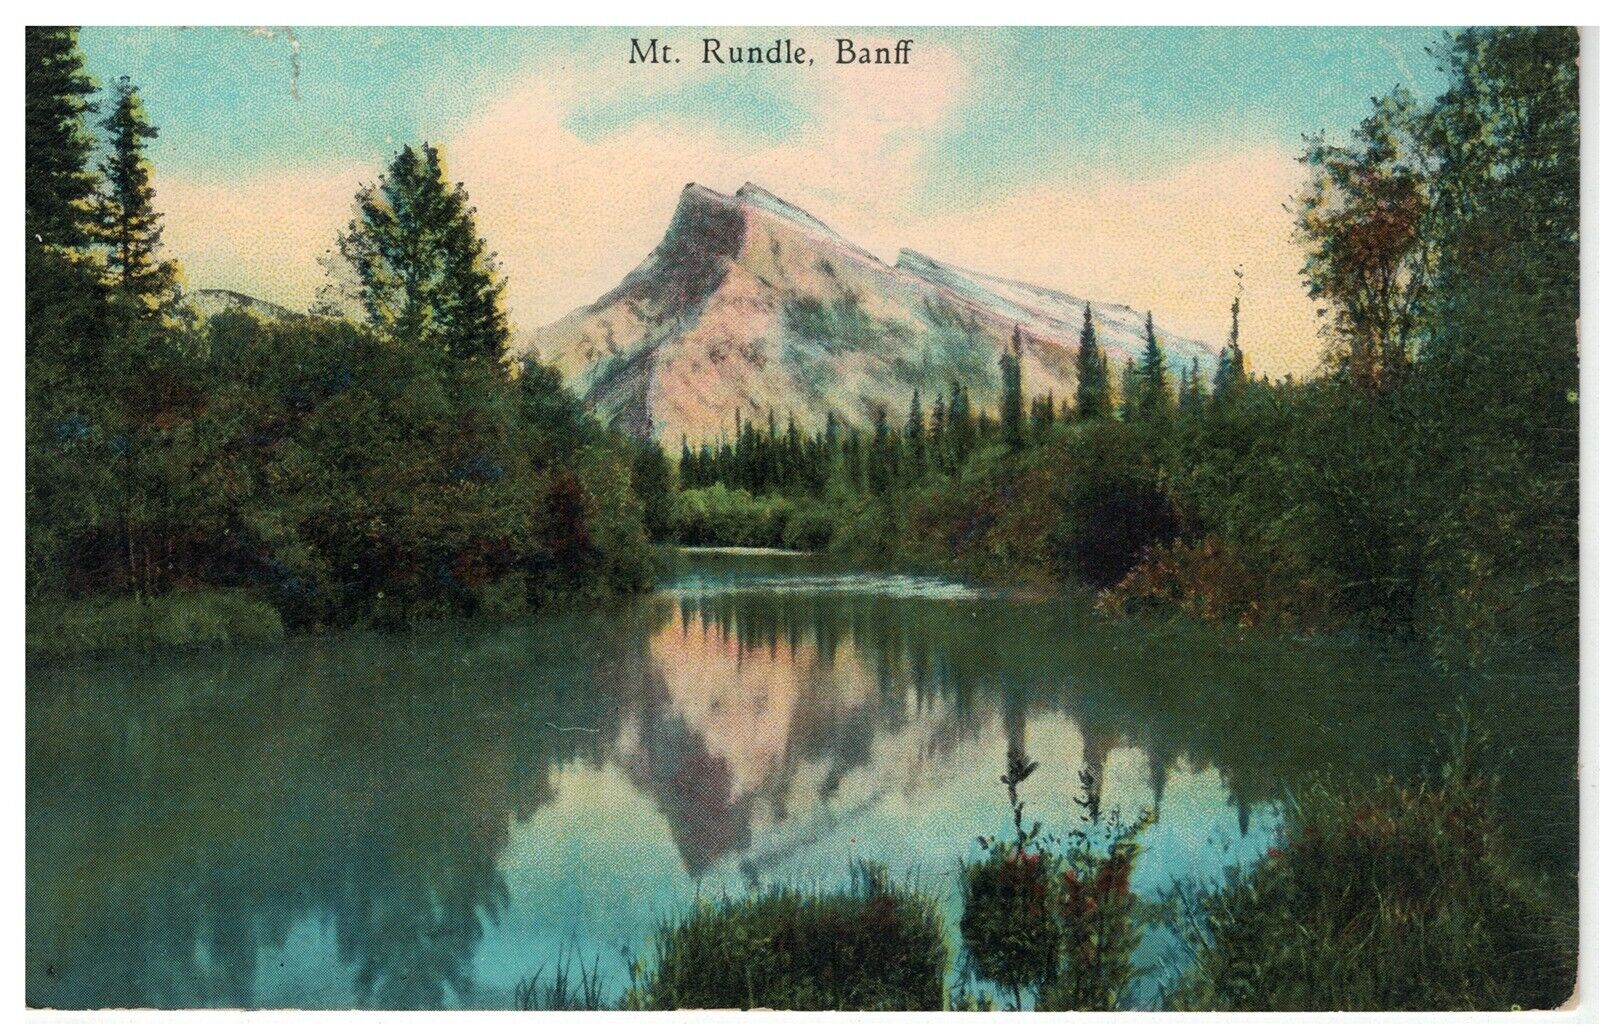 Mt. Rundle Banff, Along the Line of the Canadian Pacific Railway Canada Postcard